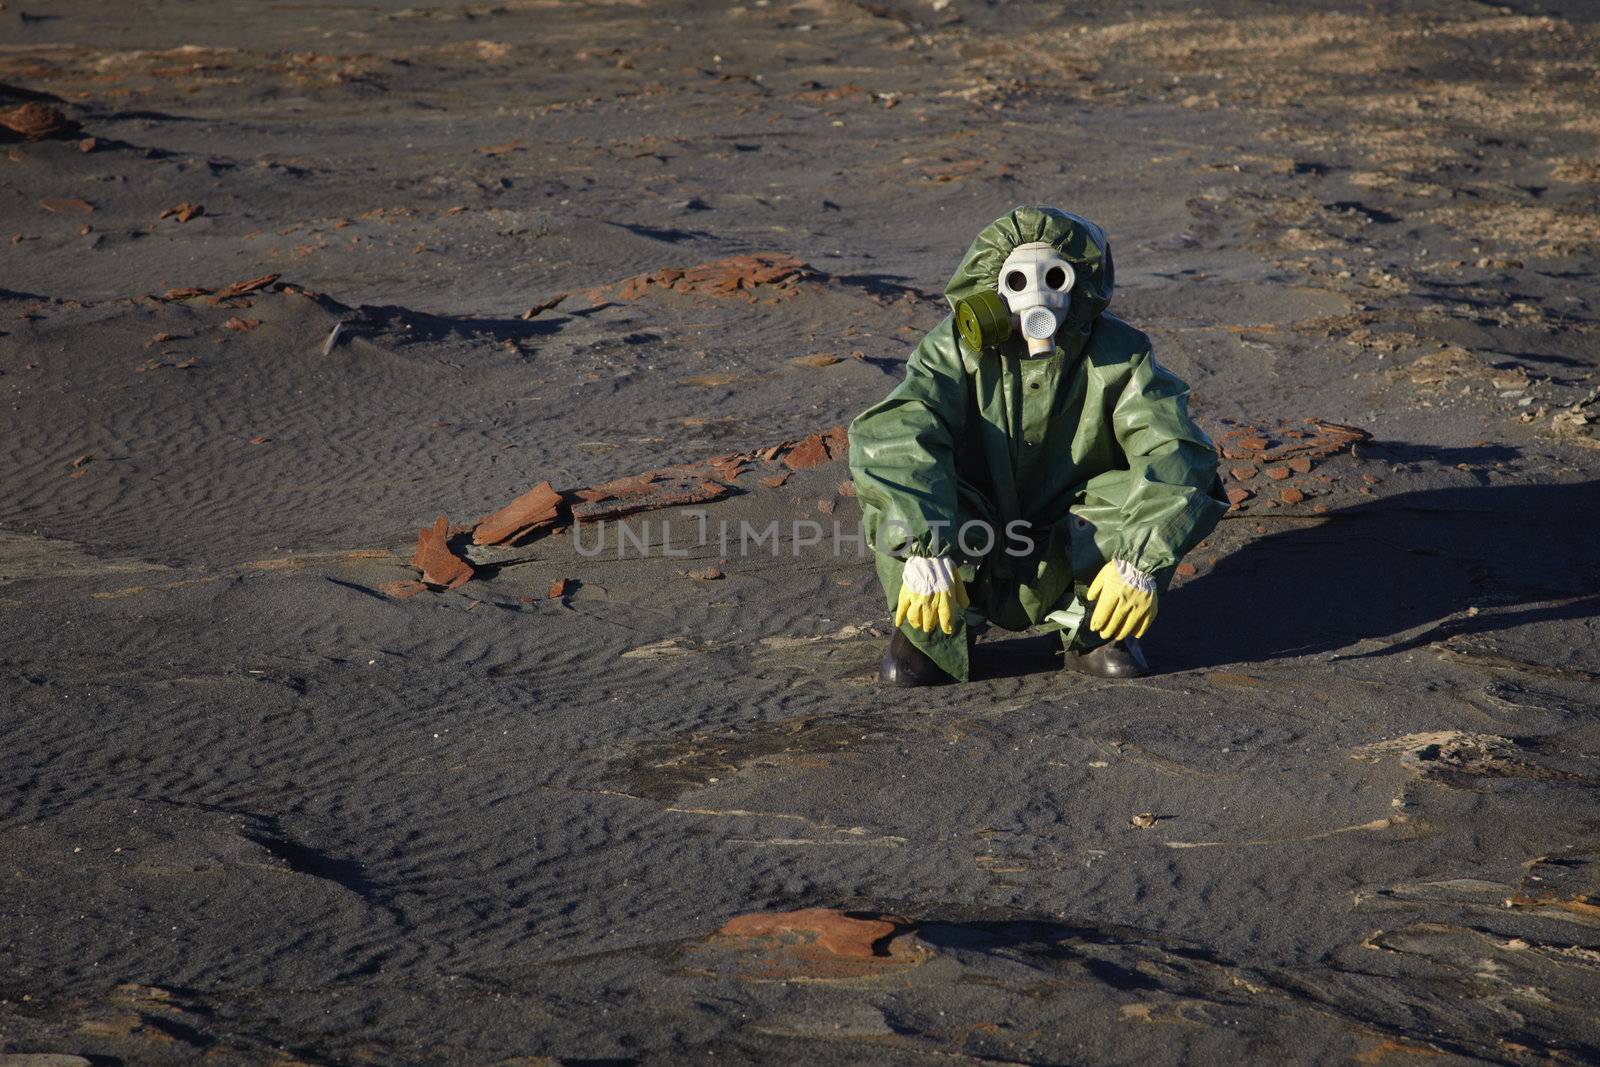 Man in protective clothing sitting in desert by pzaxe